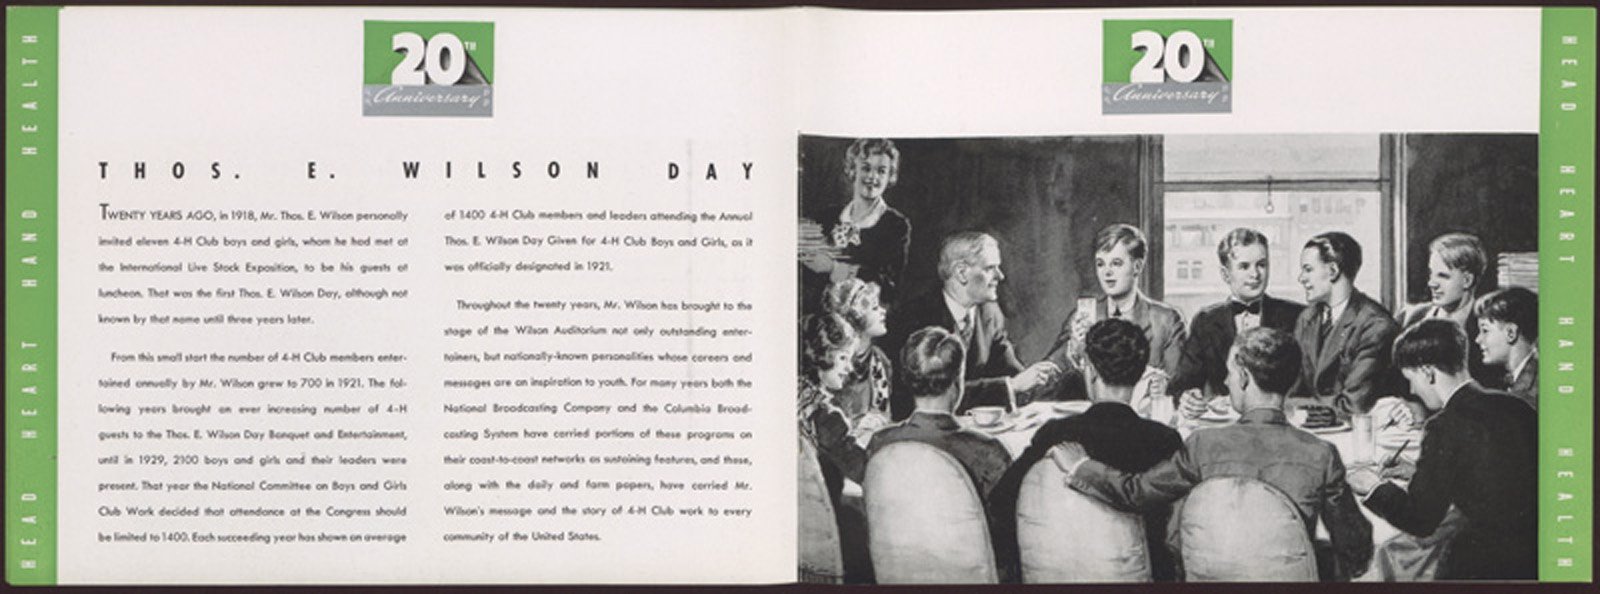 Two internal pages of a program for the 20th anniversary celebration of the 4-H Club's Thomas E. Wilson Day (1937). The article is about Thomas E. Wilson Day and features a black-and-white illustration of Thomas E. Wilson seated at a dining table with a group of young boys and girls.